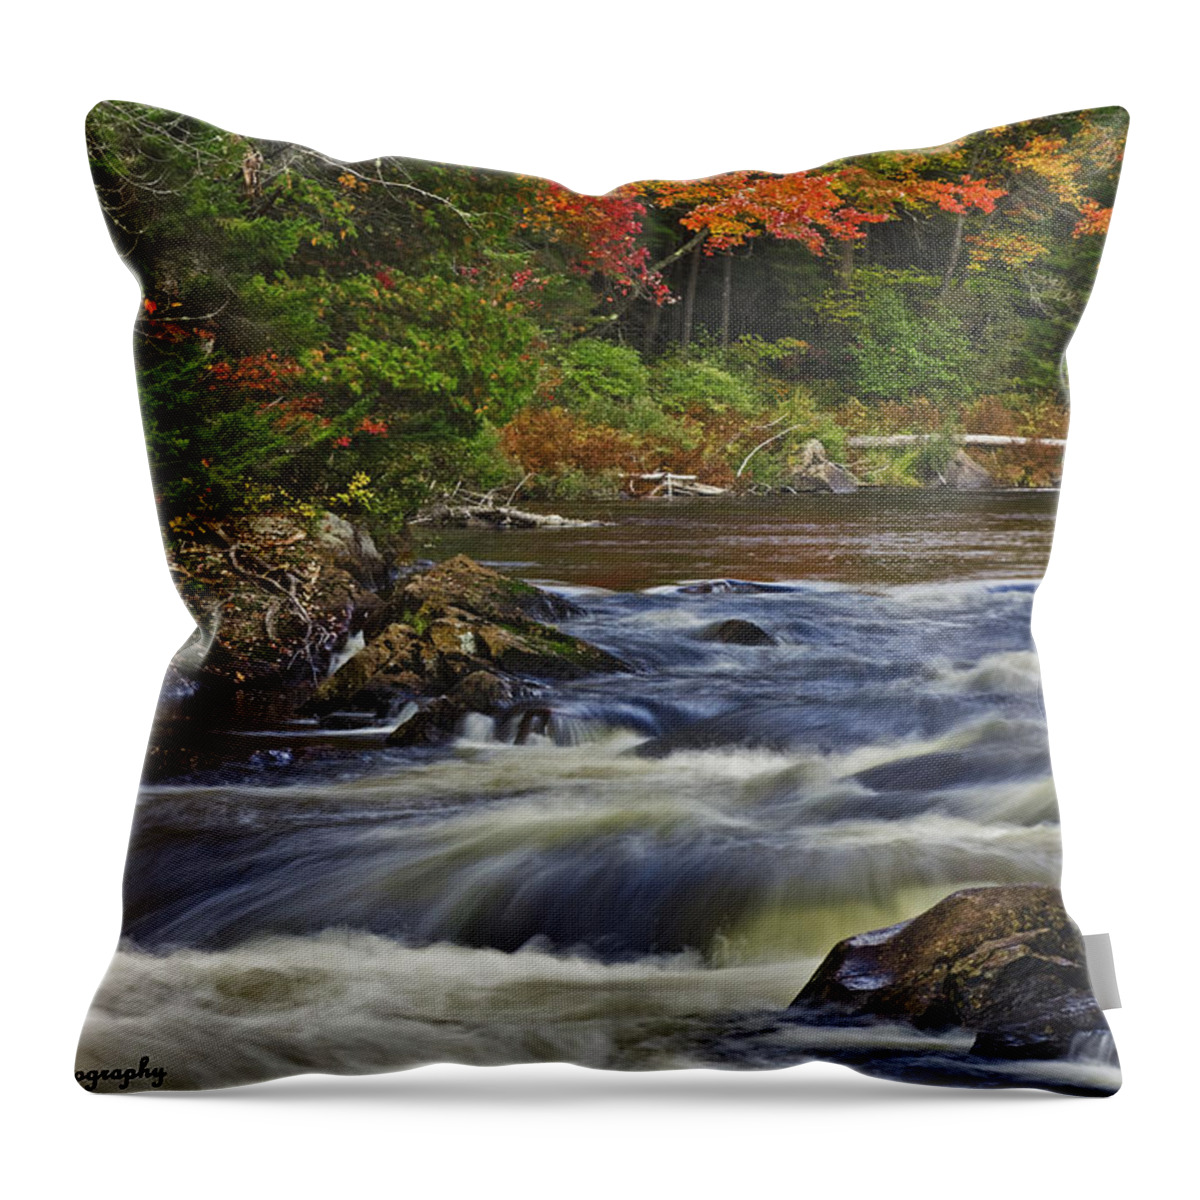 Waterfall Throw Pillow featuring the photograph Chute Croches by Hany J